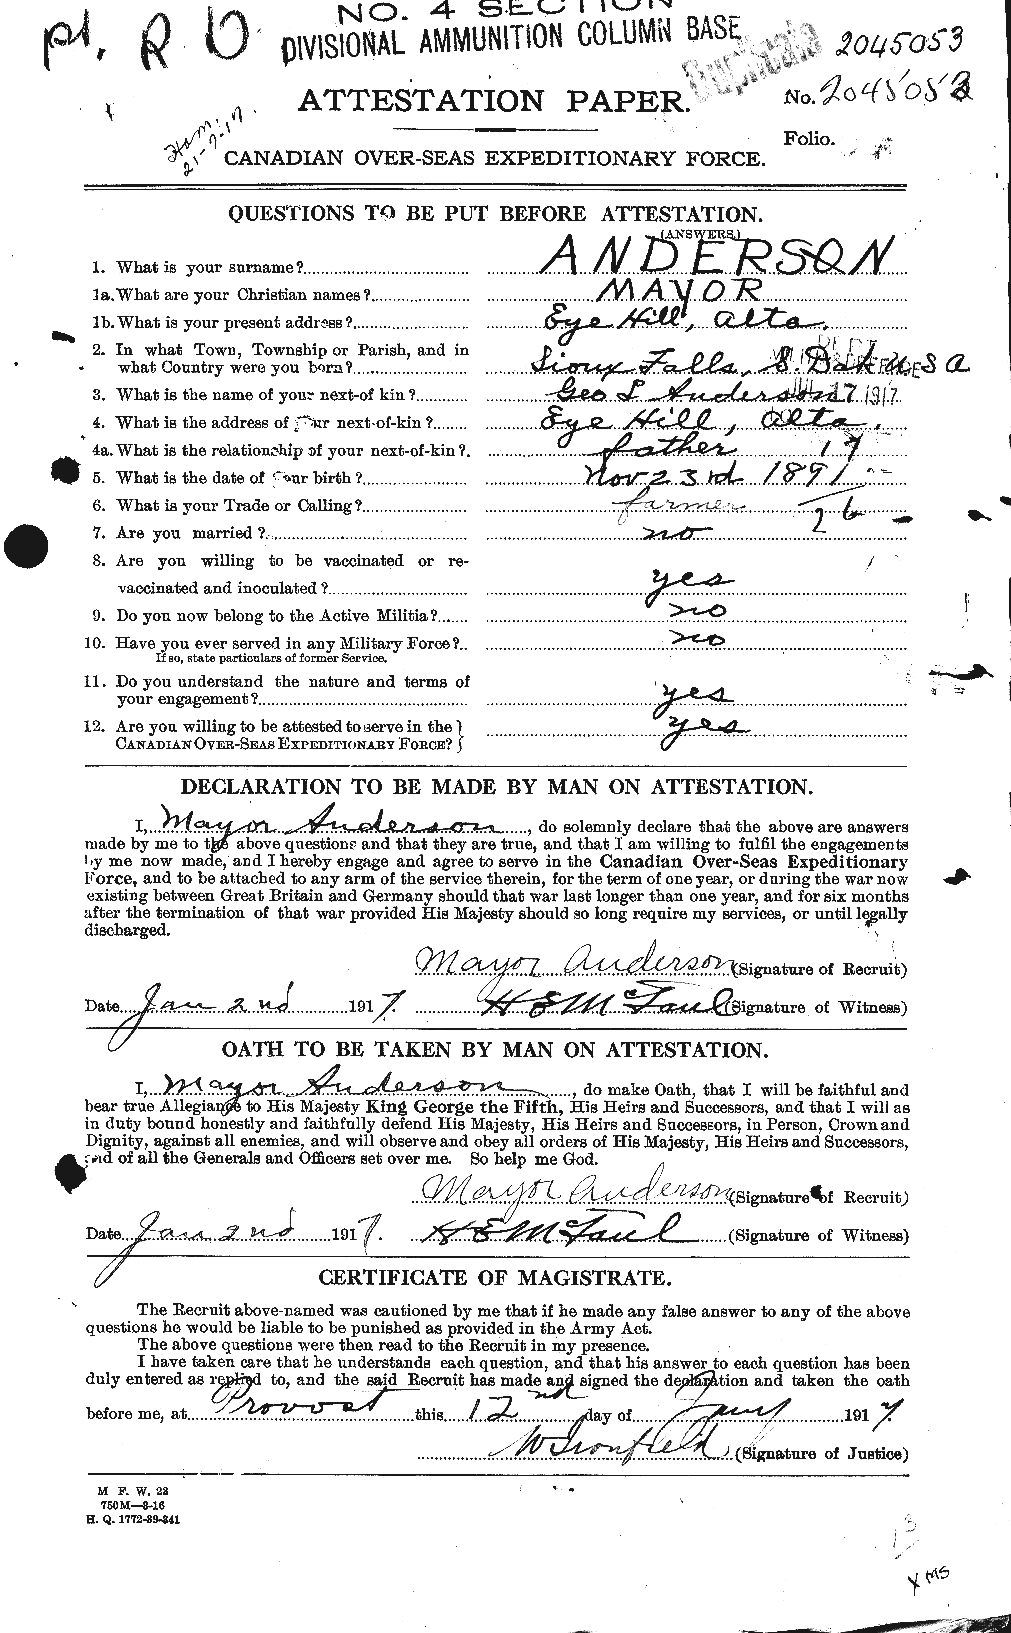 Personnel Records of the First World War - CEF 207459a